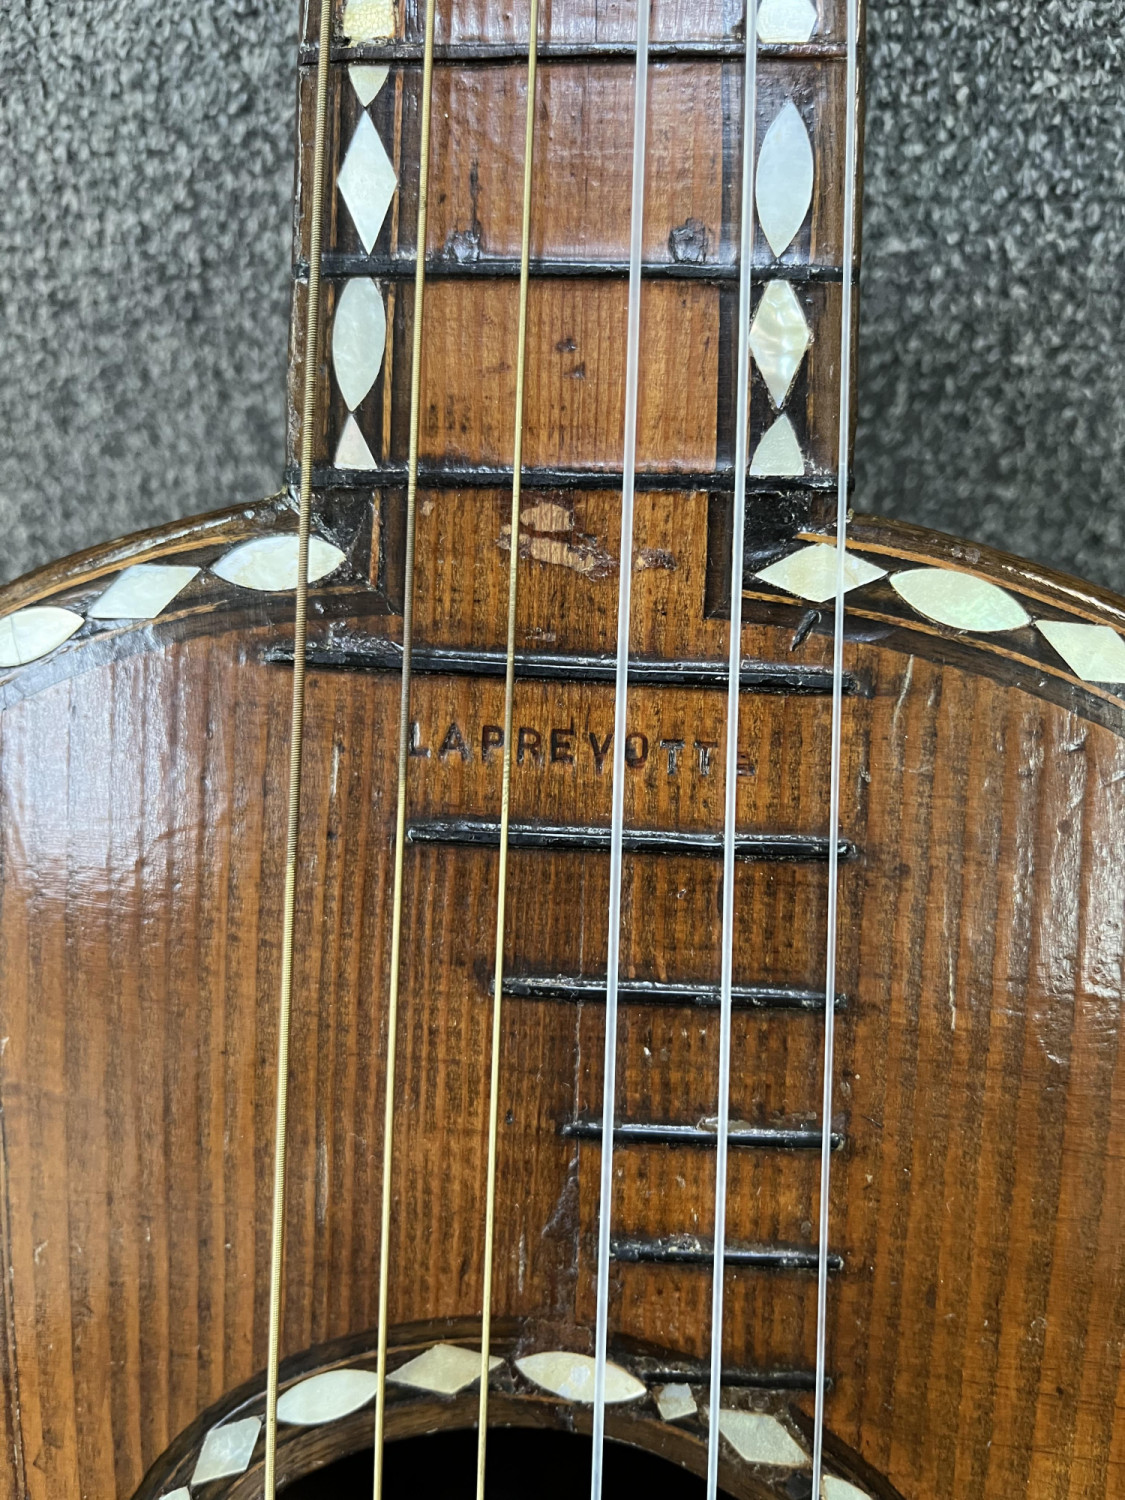 Stamped Laprevotte twice, over the end block and at the 13th Fret